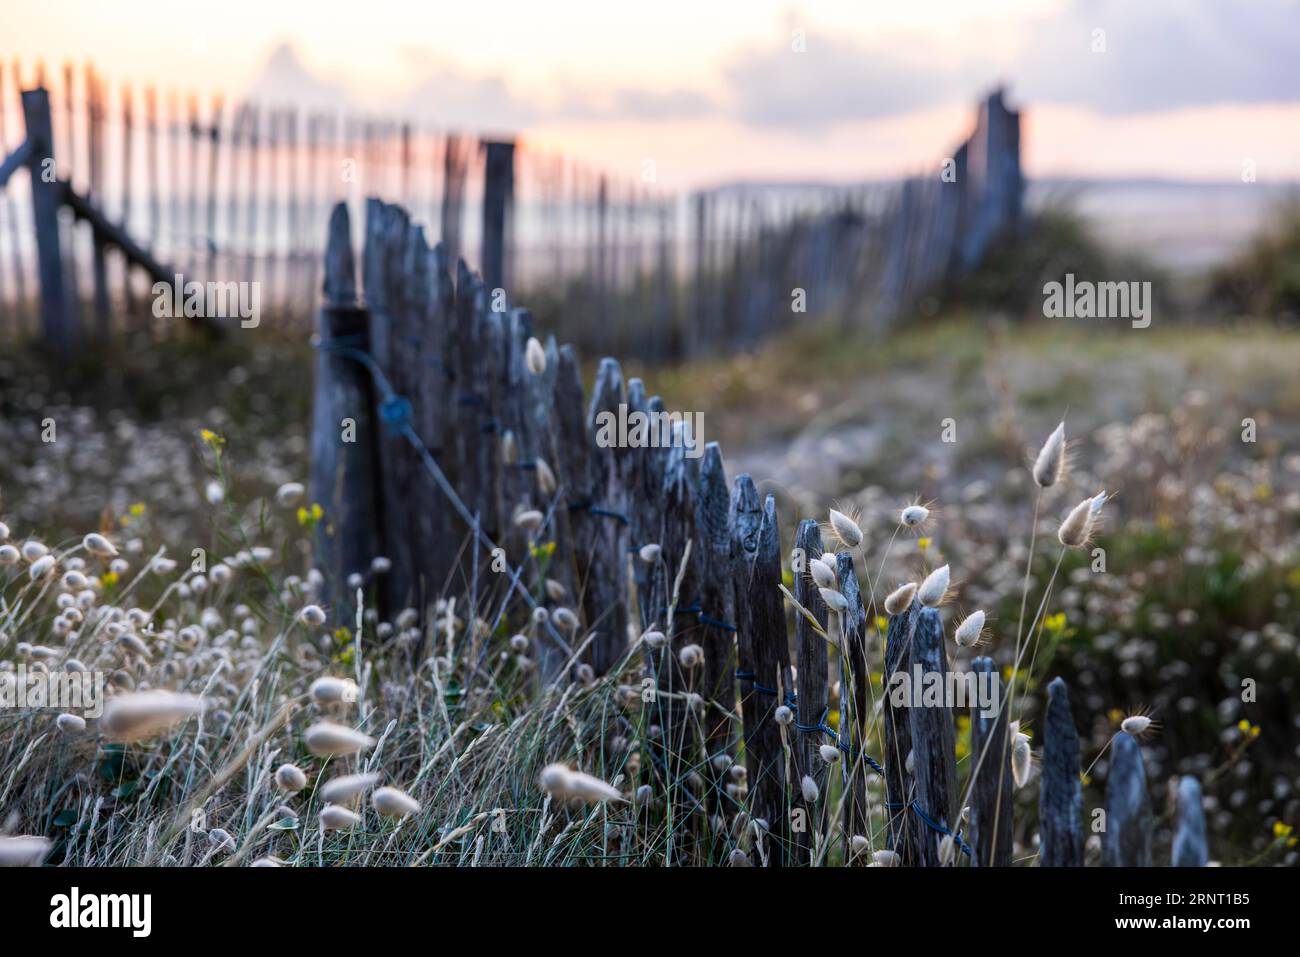 Beach, sea, dune landscape with the regionally typical wooden picket fence at sunset, Portbail, Cotentin, Manche, Normandy, France Stock Photo